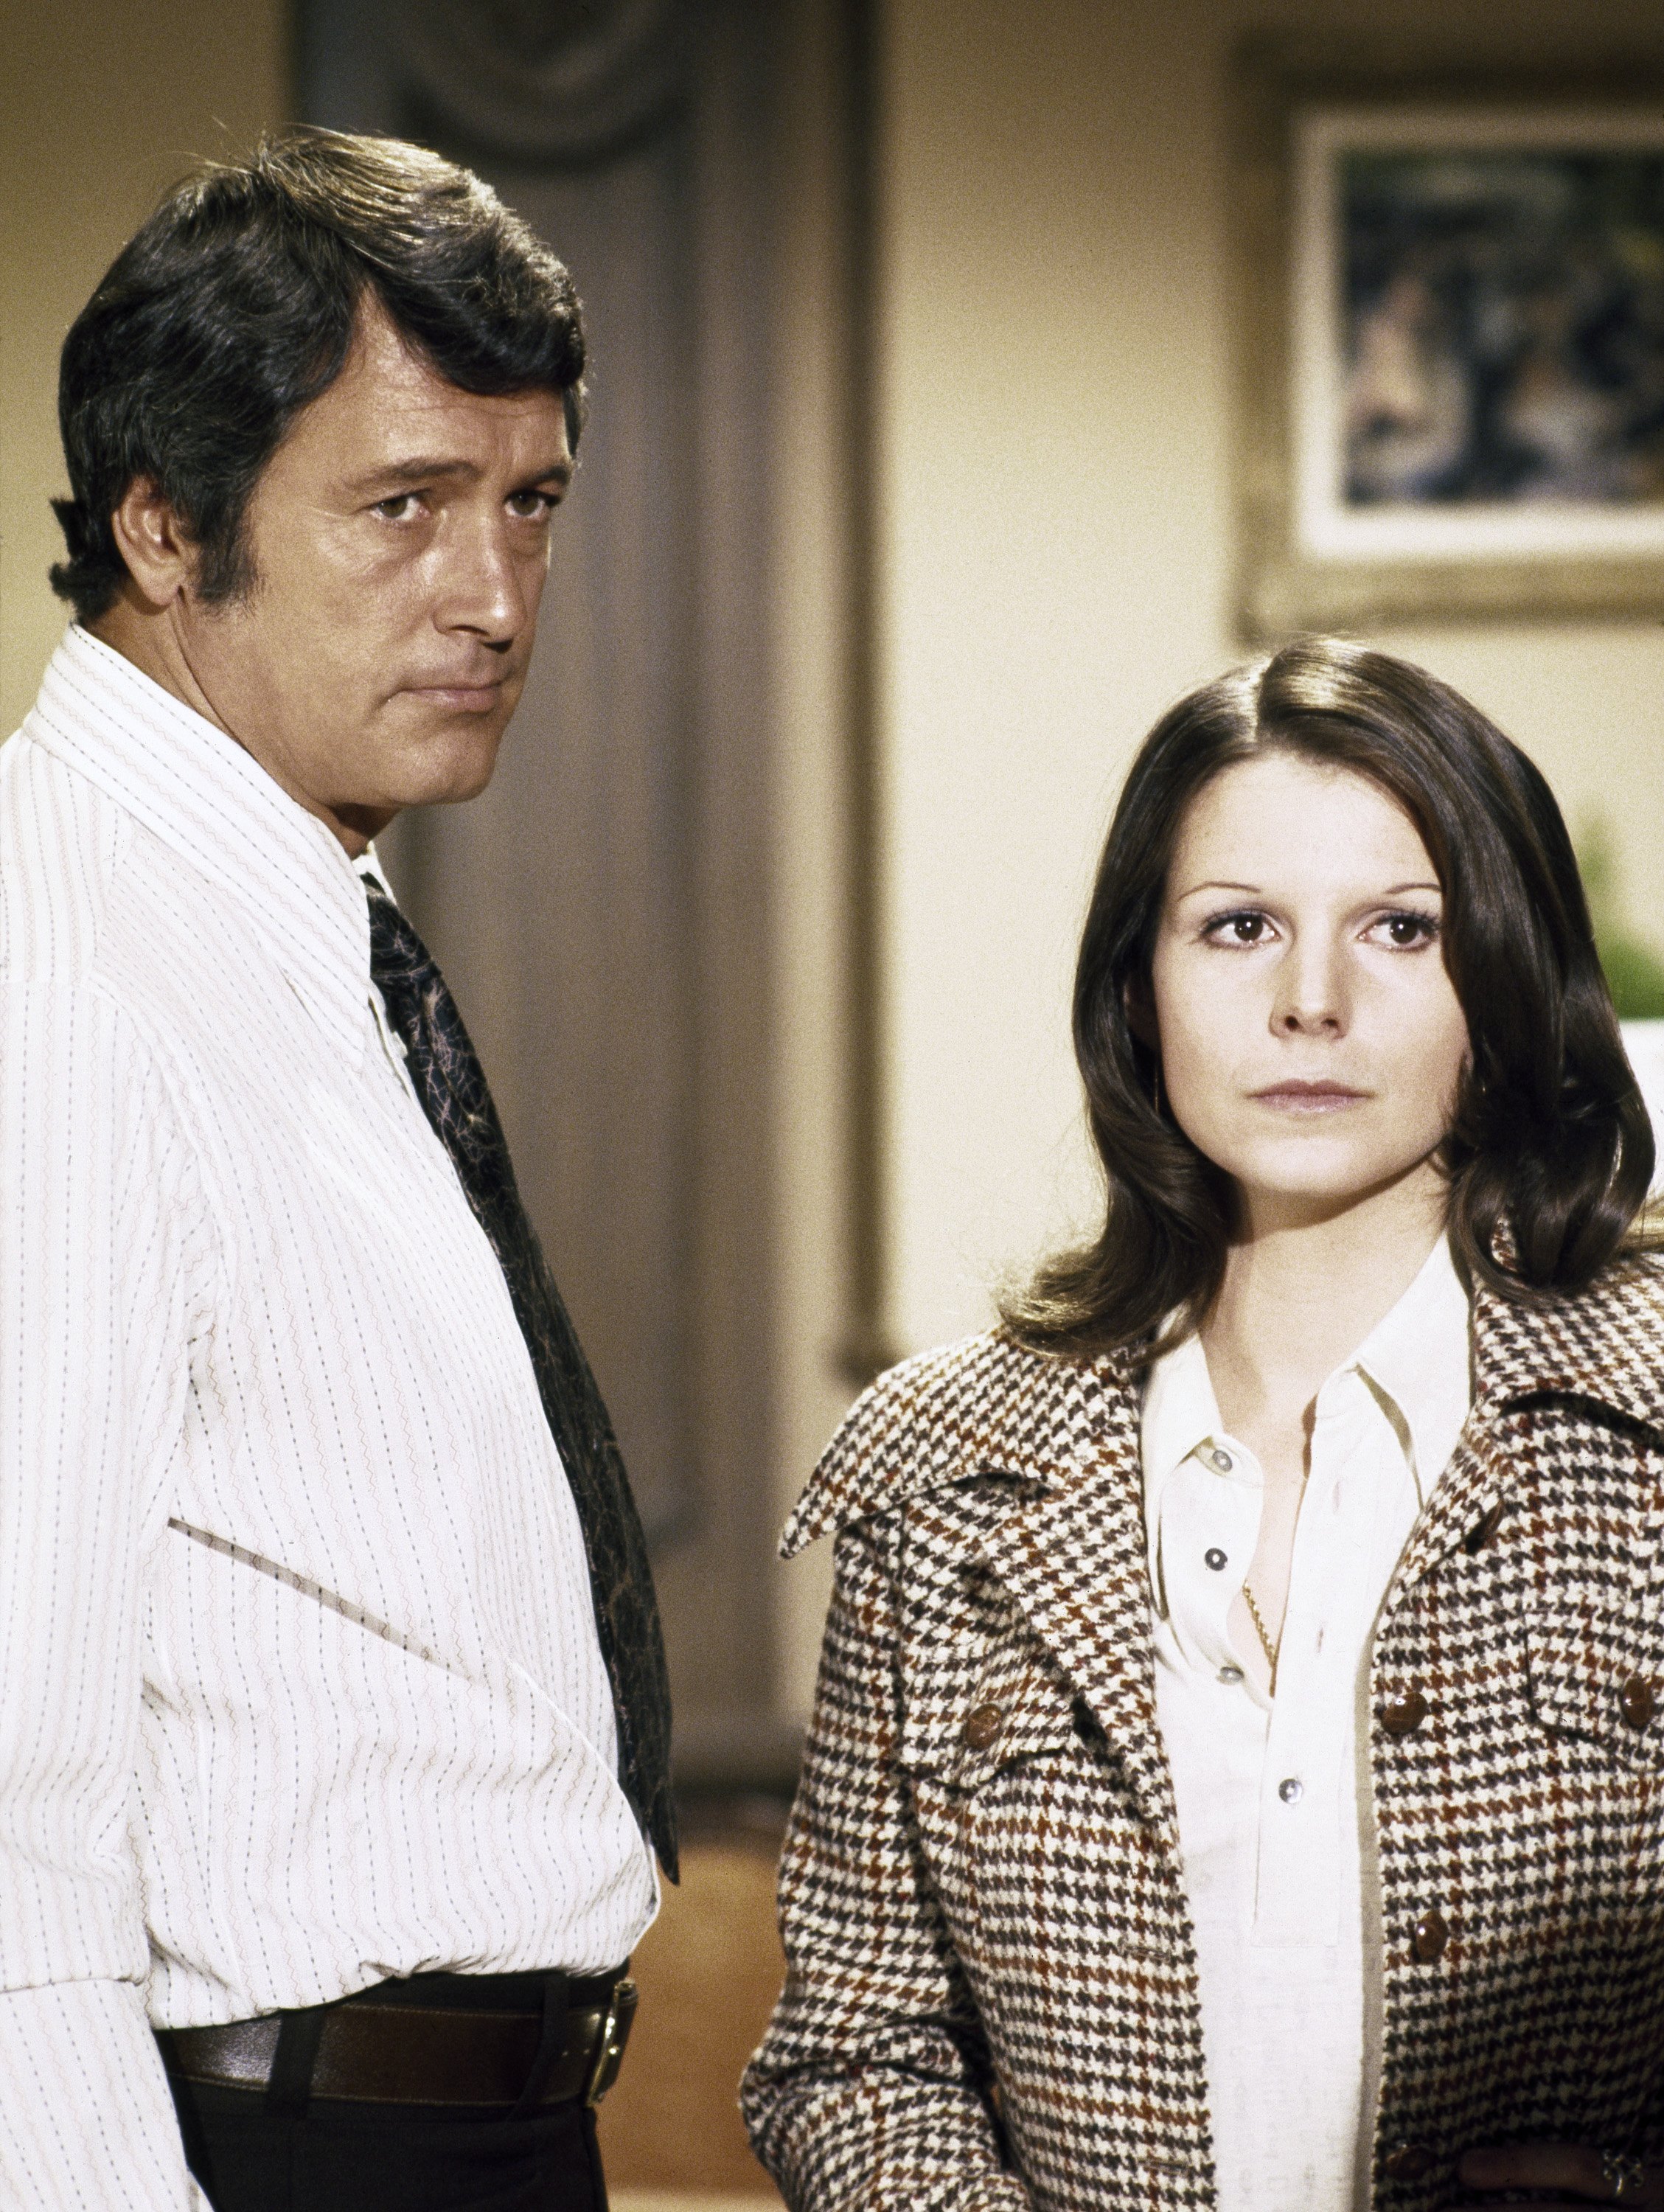 Rock Hudson as Commissioner Stewart McMillan and Susan Saint James as Sally McMillan in "McMillan and Wife" on September 5, 2006 | Source: Getty Images